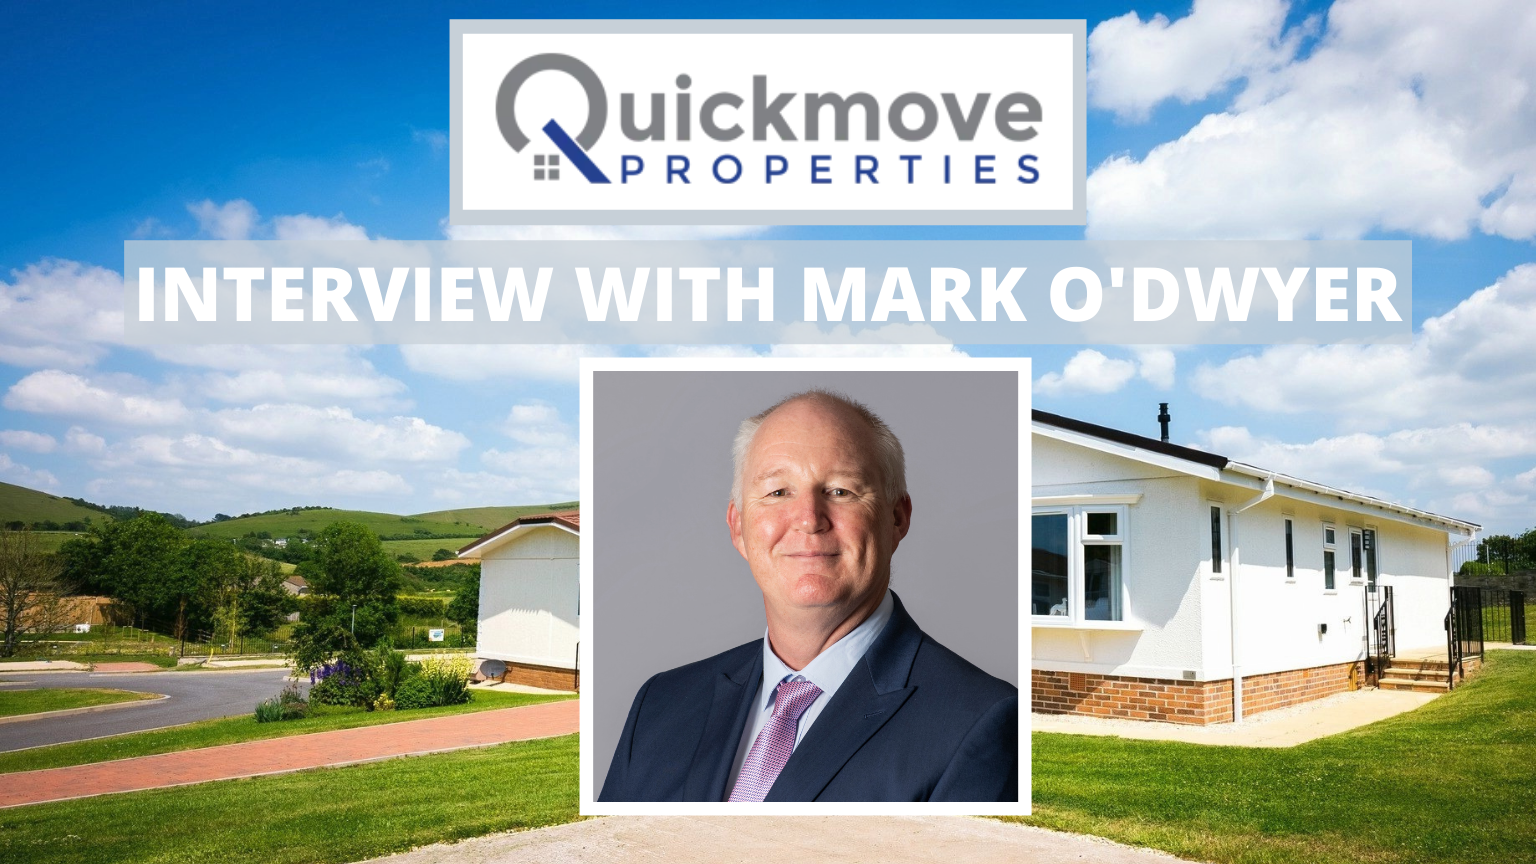 Mark O'Dwyer from Quickmove Properties